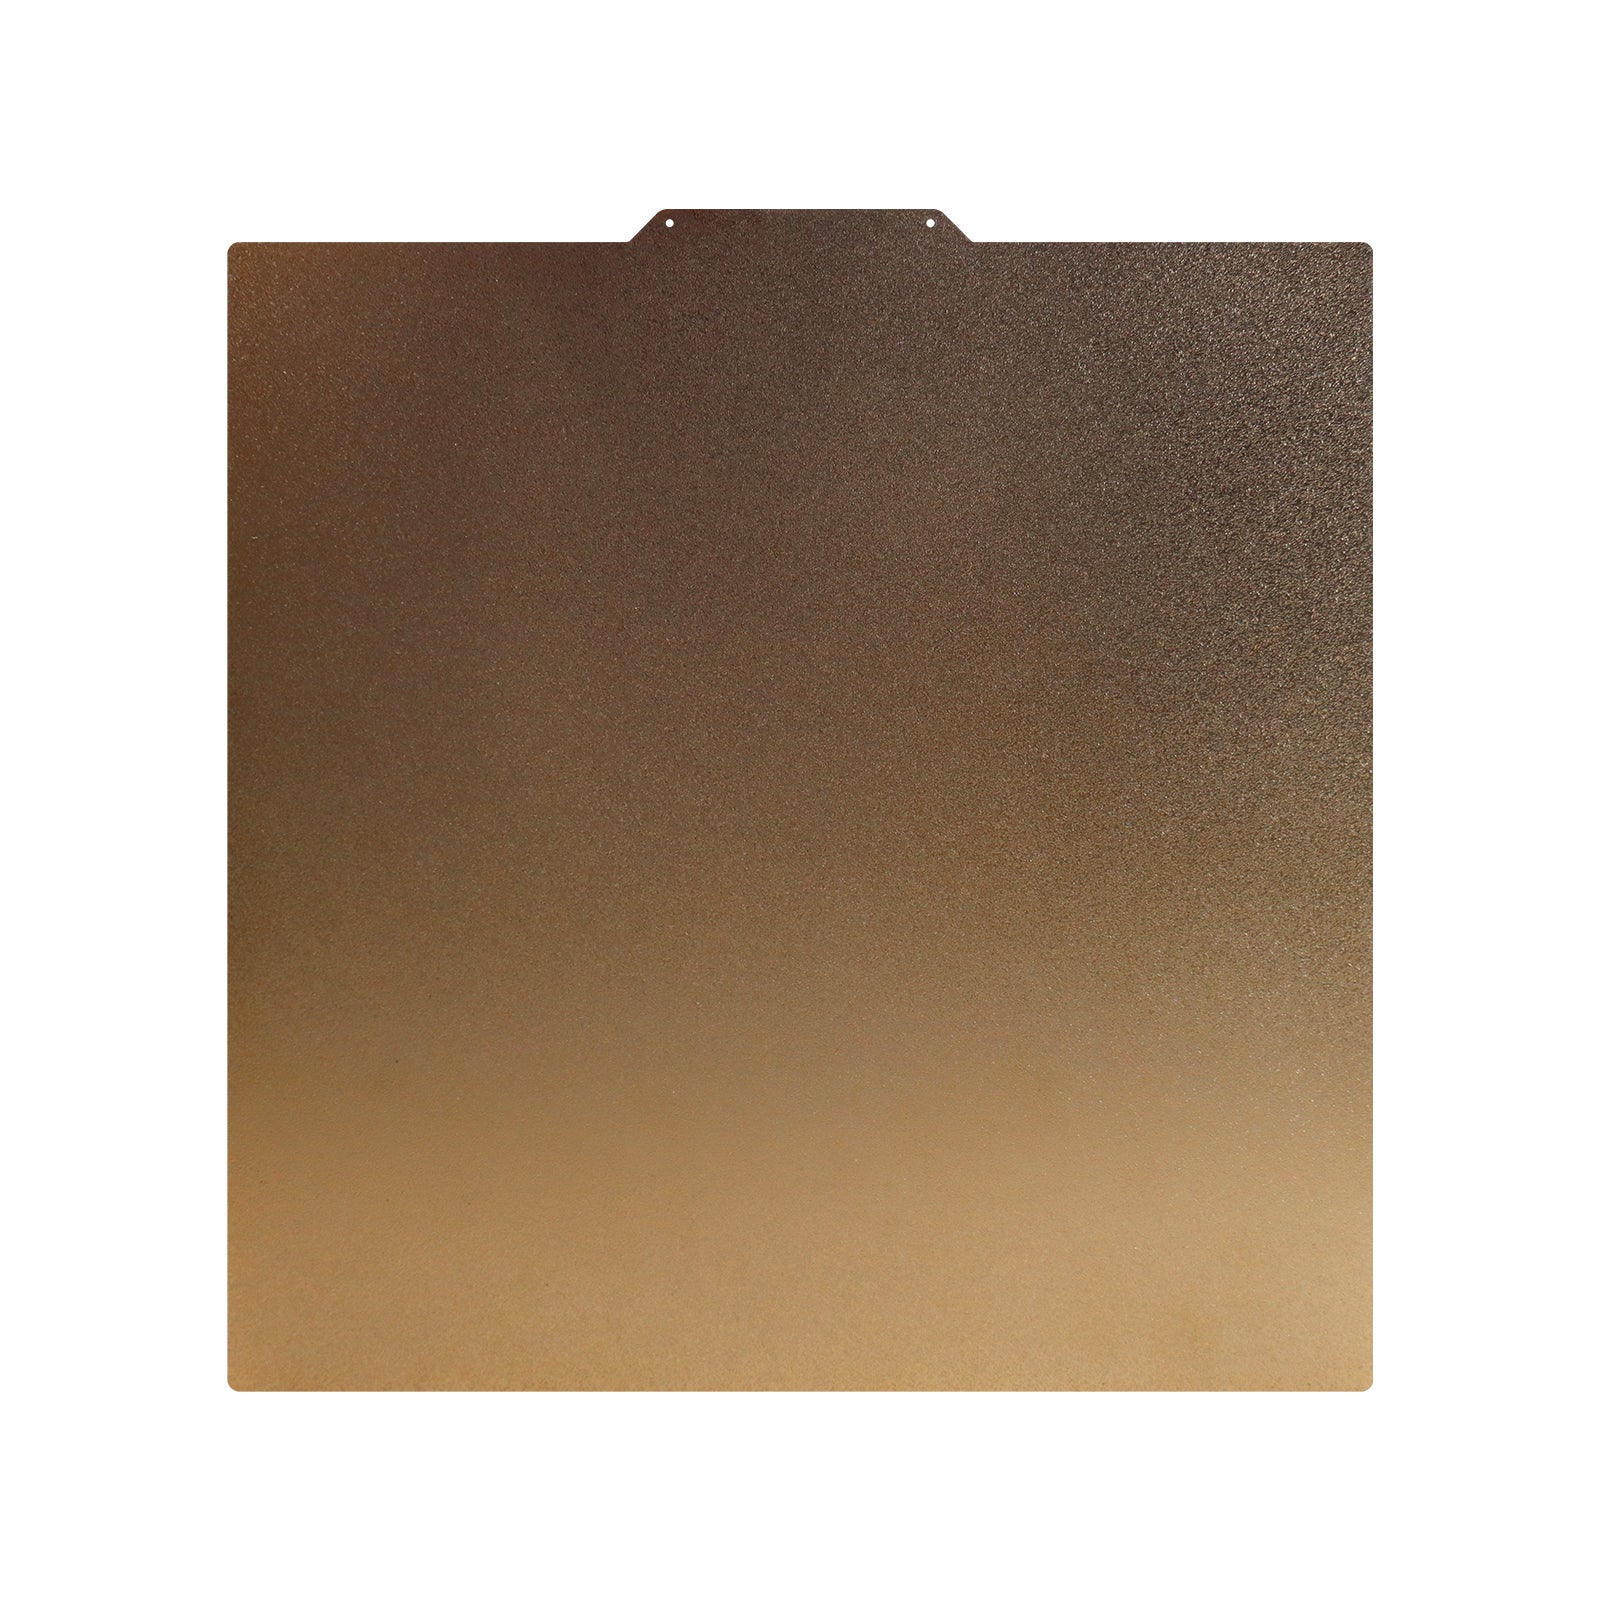 X-Max 3 Double-sided gold PEI plate – Qidi Tech Online Store